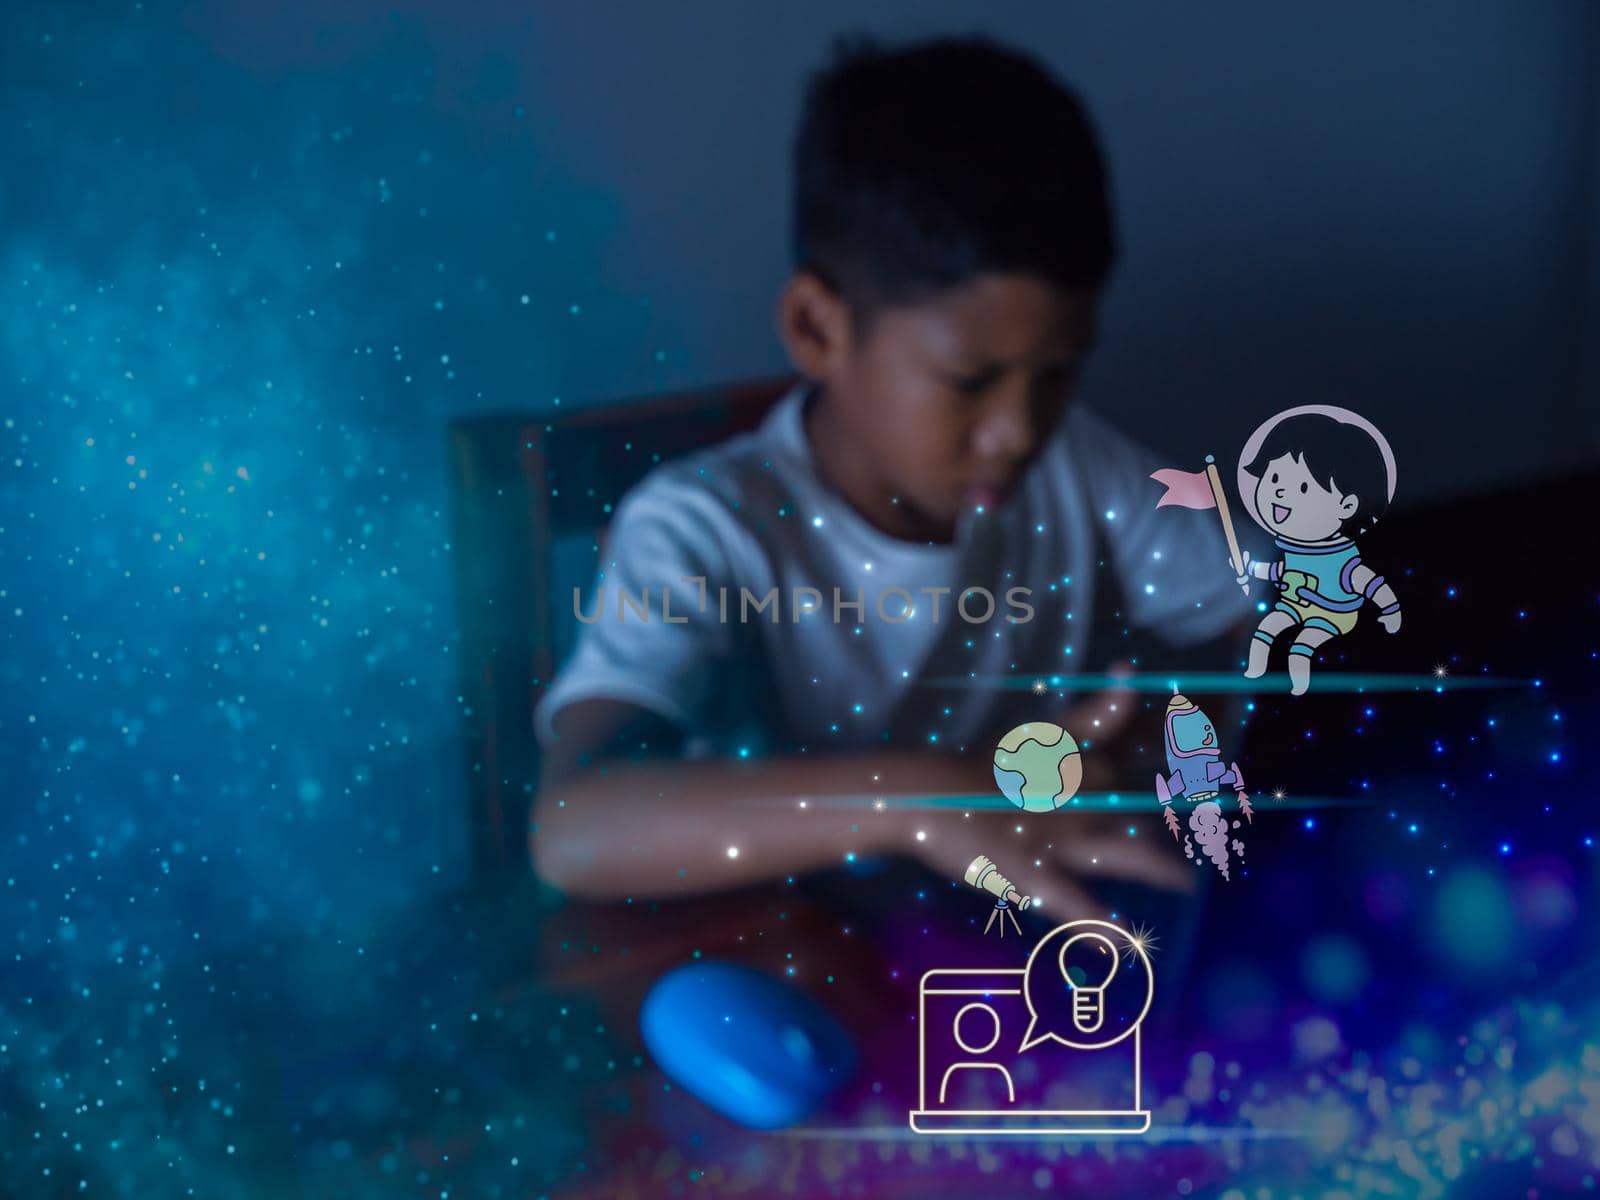 education icon On the background of blurry pictures a boy is staring at a computer monitor. educational concept, educational information search, copy space by Unimages2527